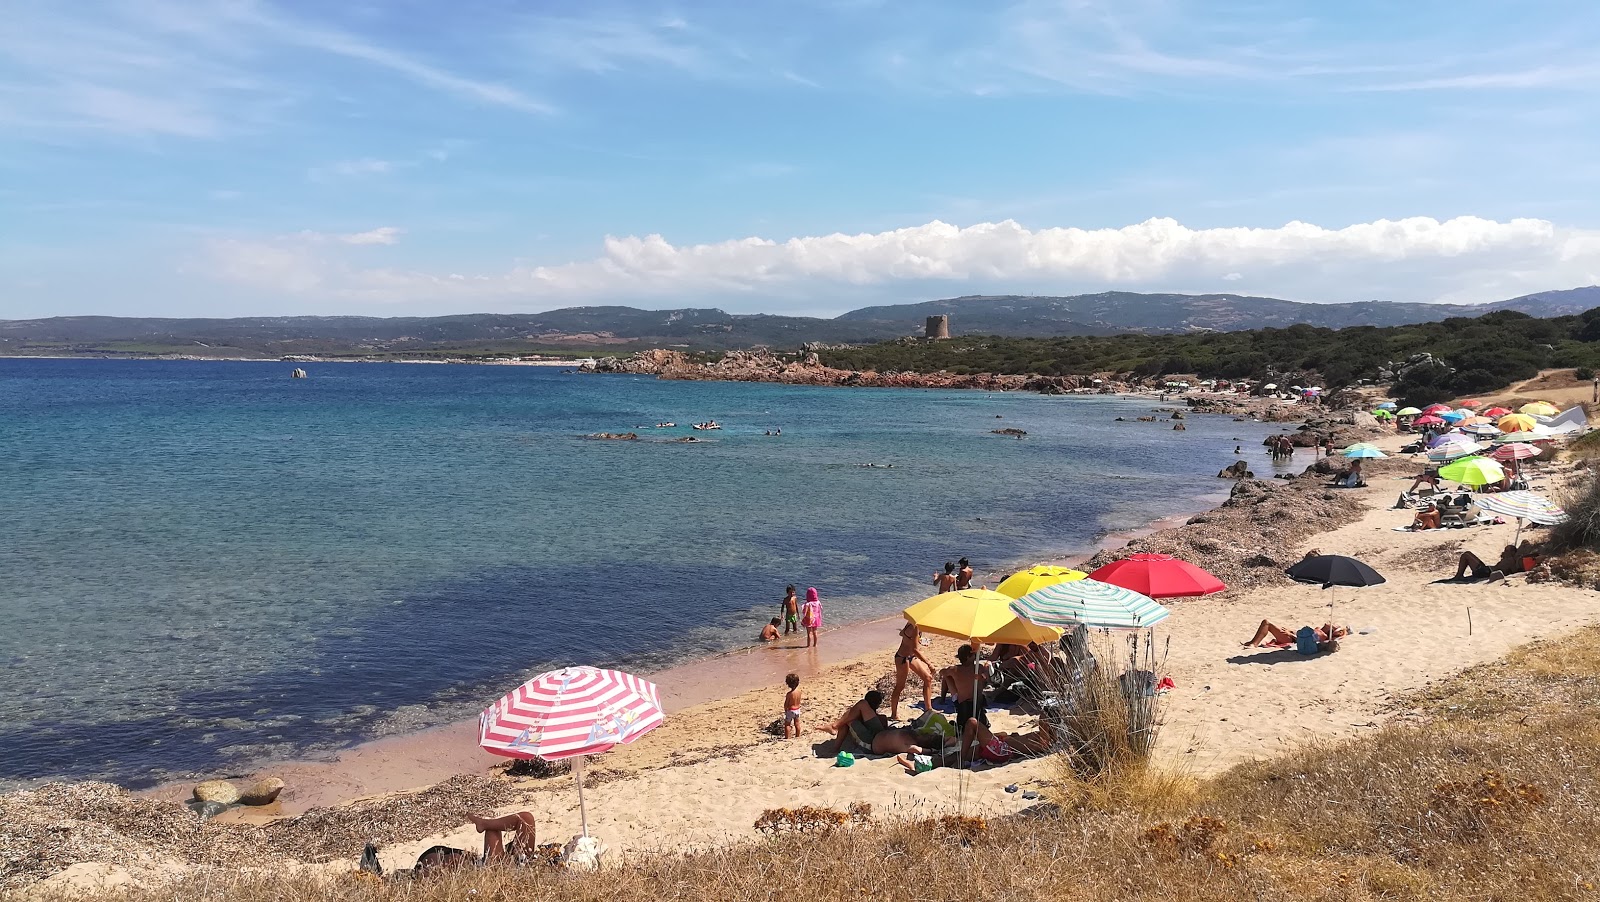 Photo of Spiaggia San Silverio with small bay